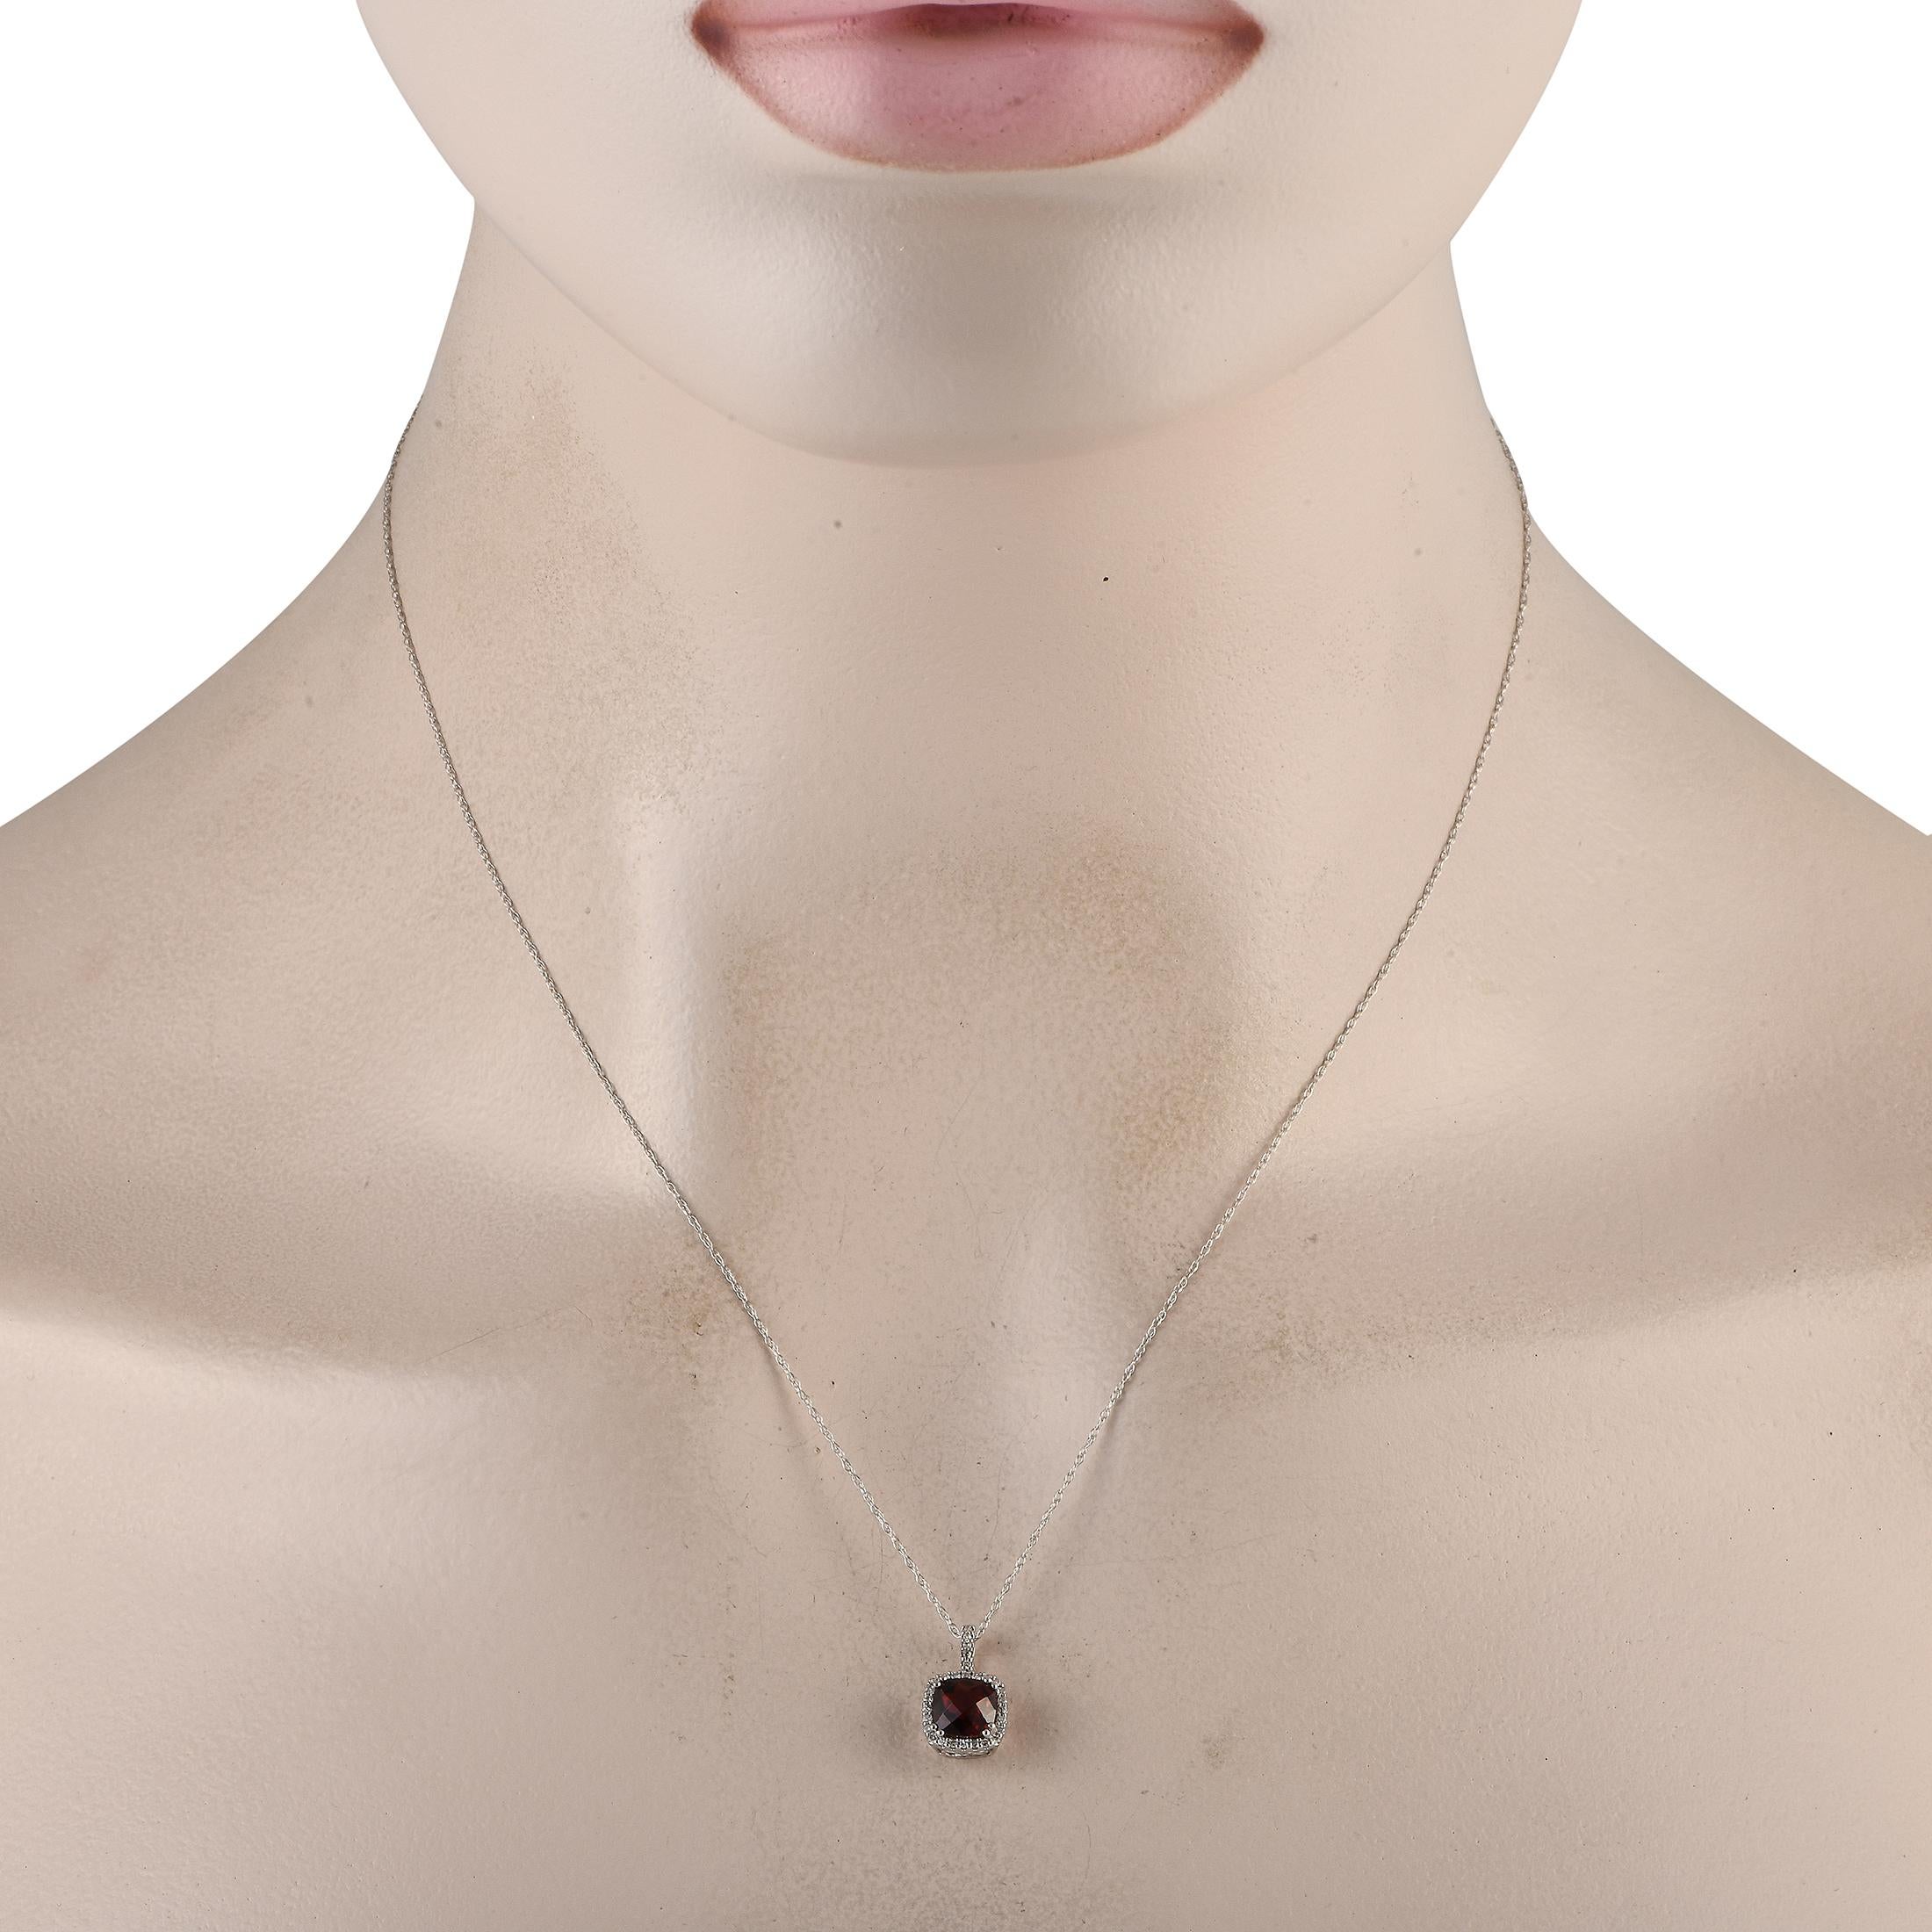 A breathtaking Garnet gemstone is surrounded by a halo of Diamonds totaling 0.09 carats on this exquisite, timeless necklace. This piece is crafted from 14K white gold and includes a pendant measuring 0.50 long by 0.25 wide suspended from an 18